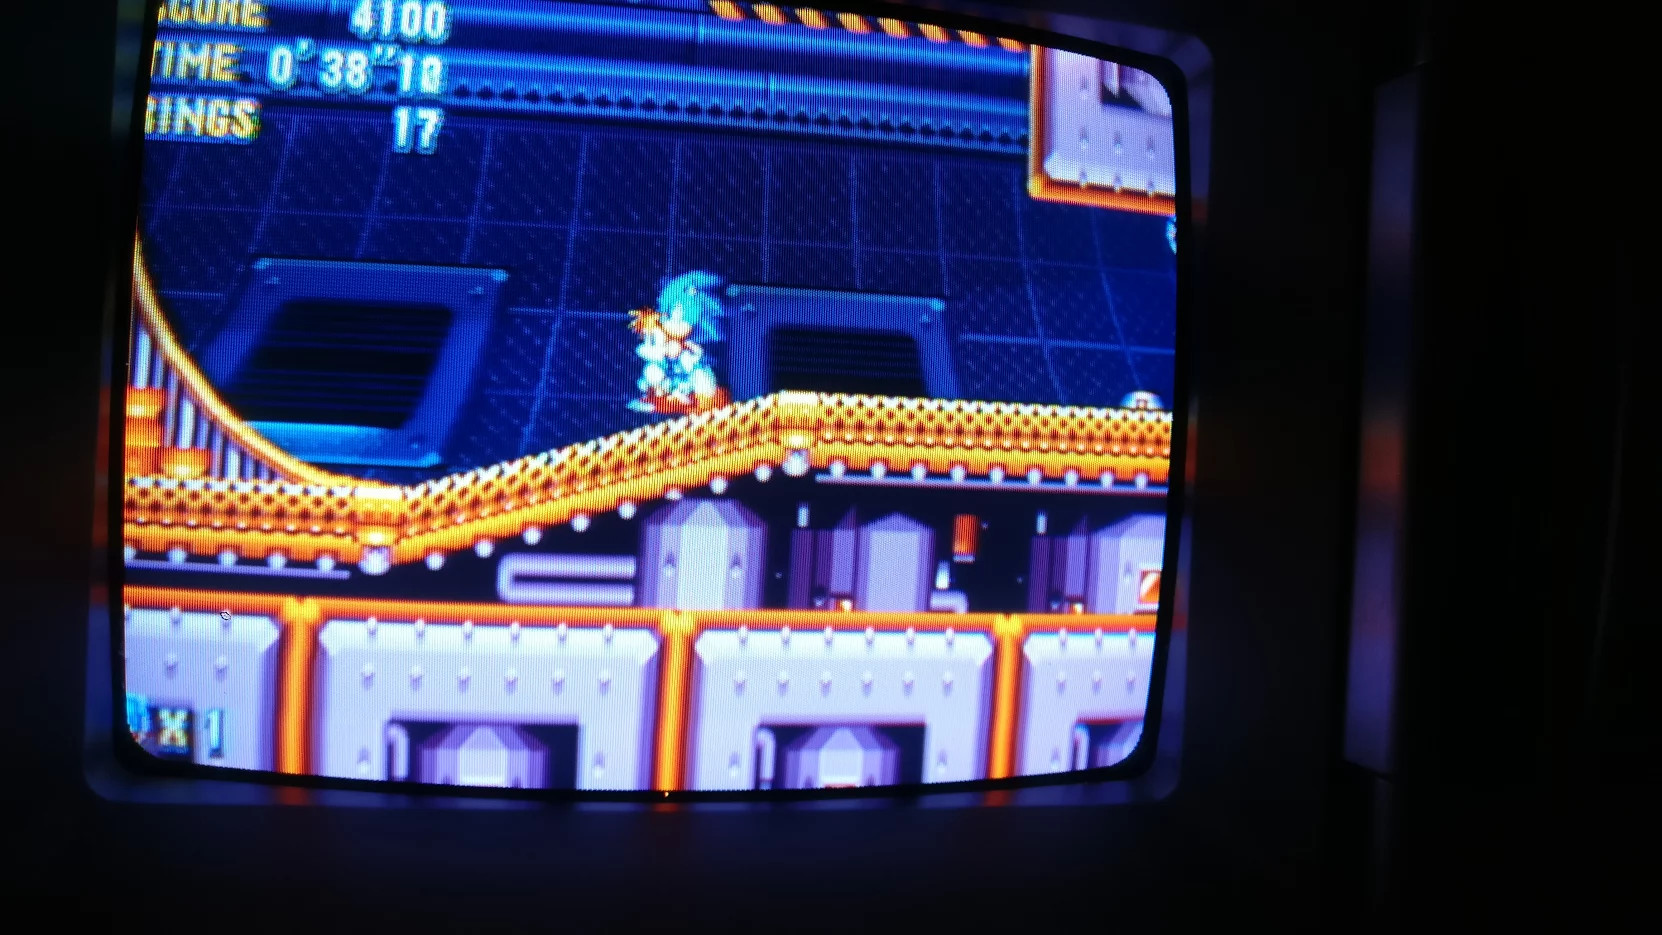 Sonic Mania News - Sonic Mania on PC Can Now Be Modded